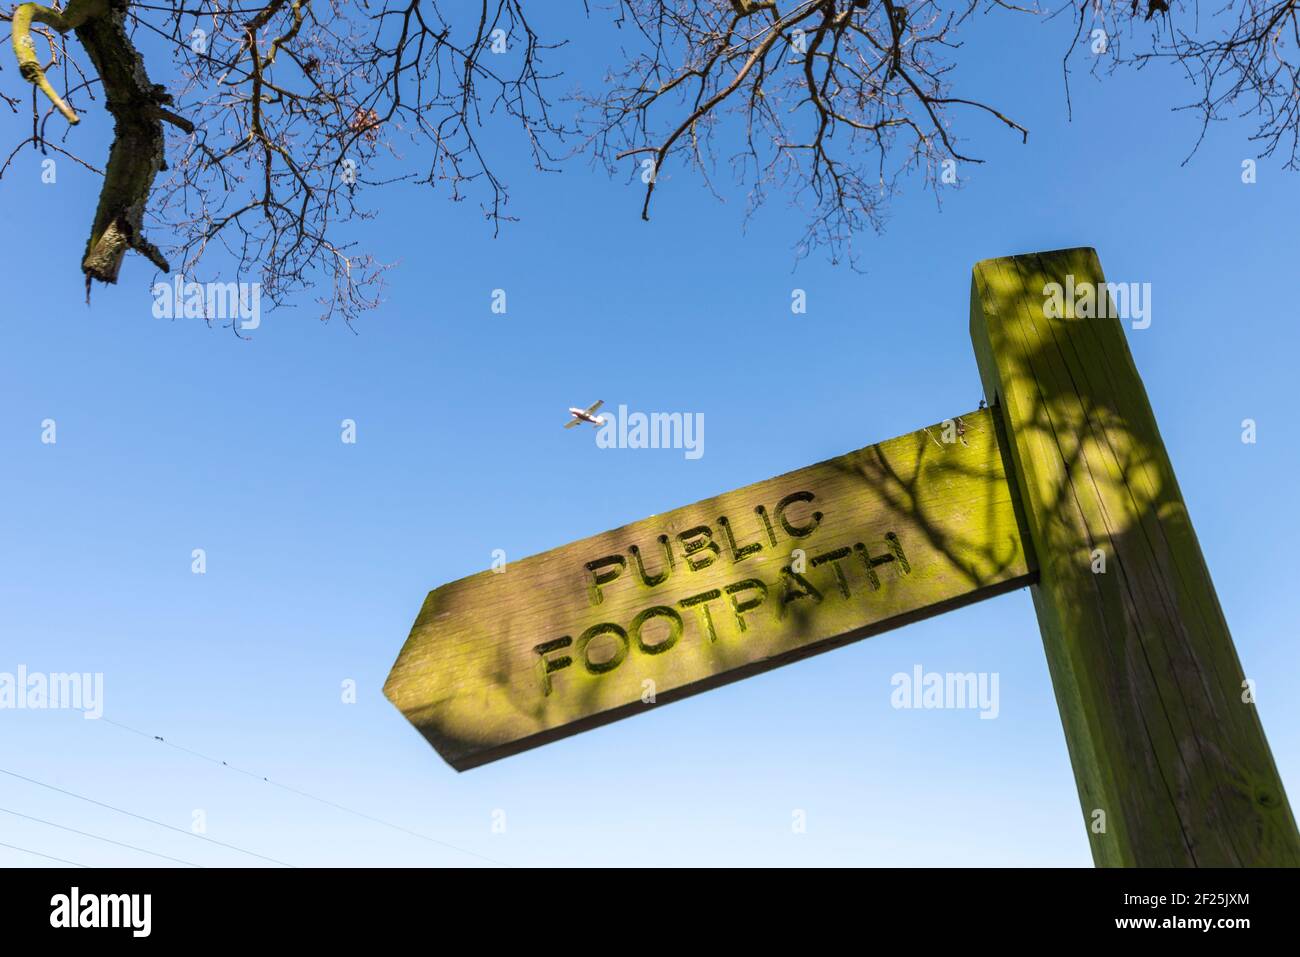 Old wooden public footpath sign in Rochford, Essex, UK, with a light aircraft plane on approach to land at London Southend Airport. Countryside travel Stock Photo